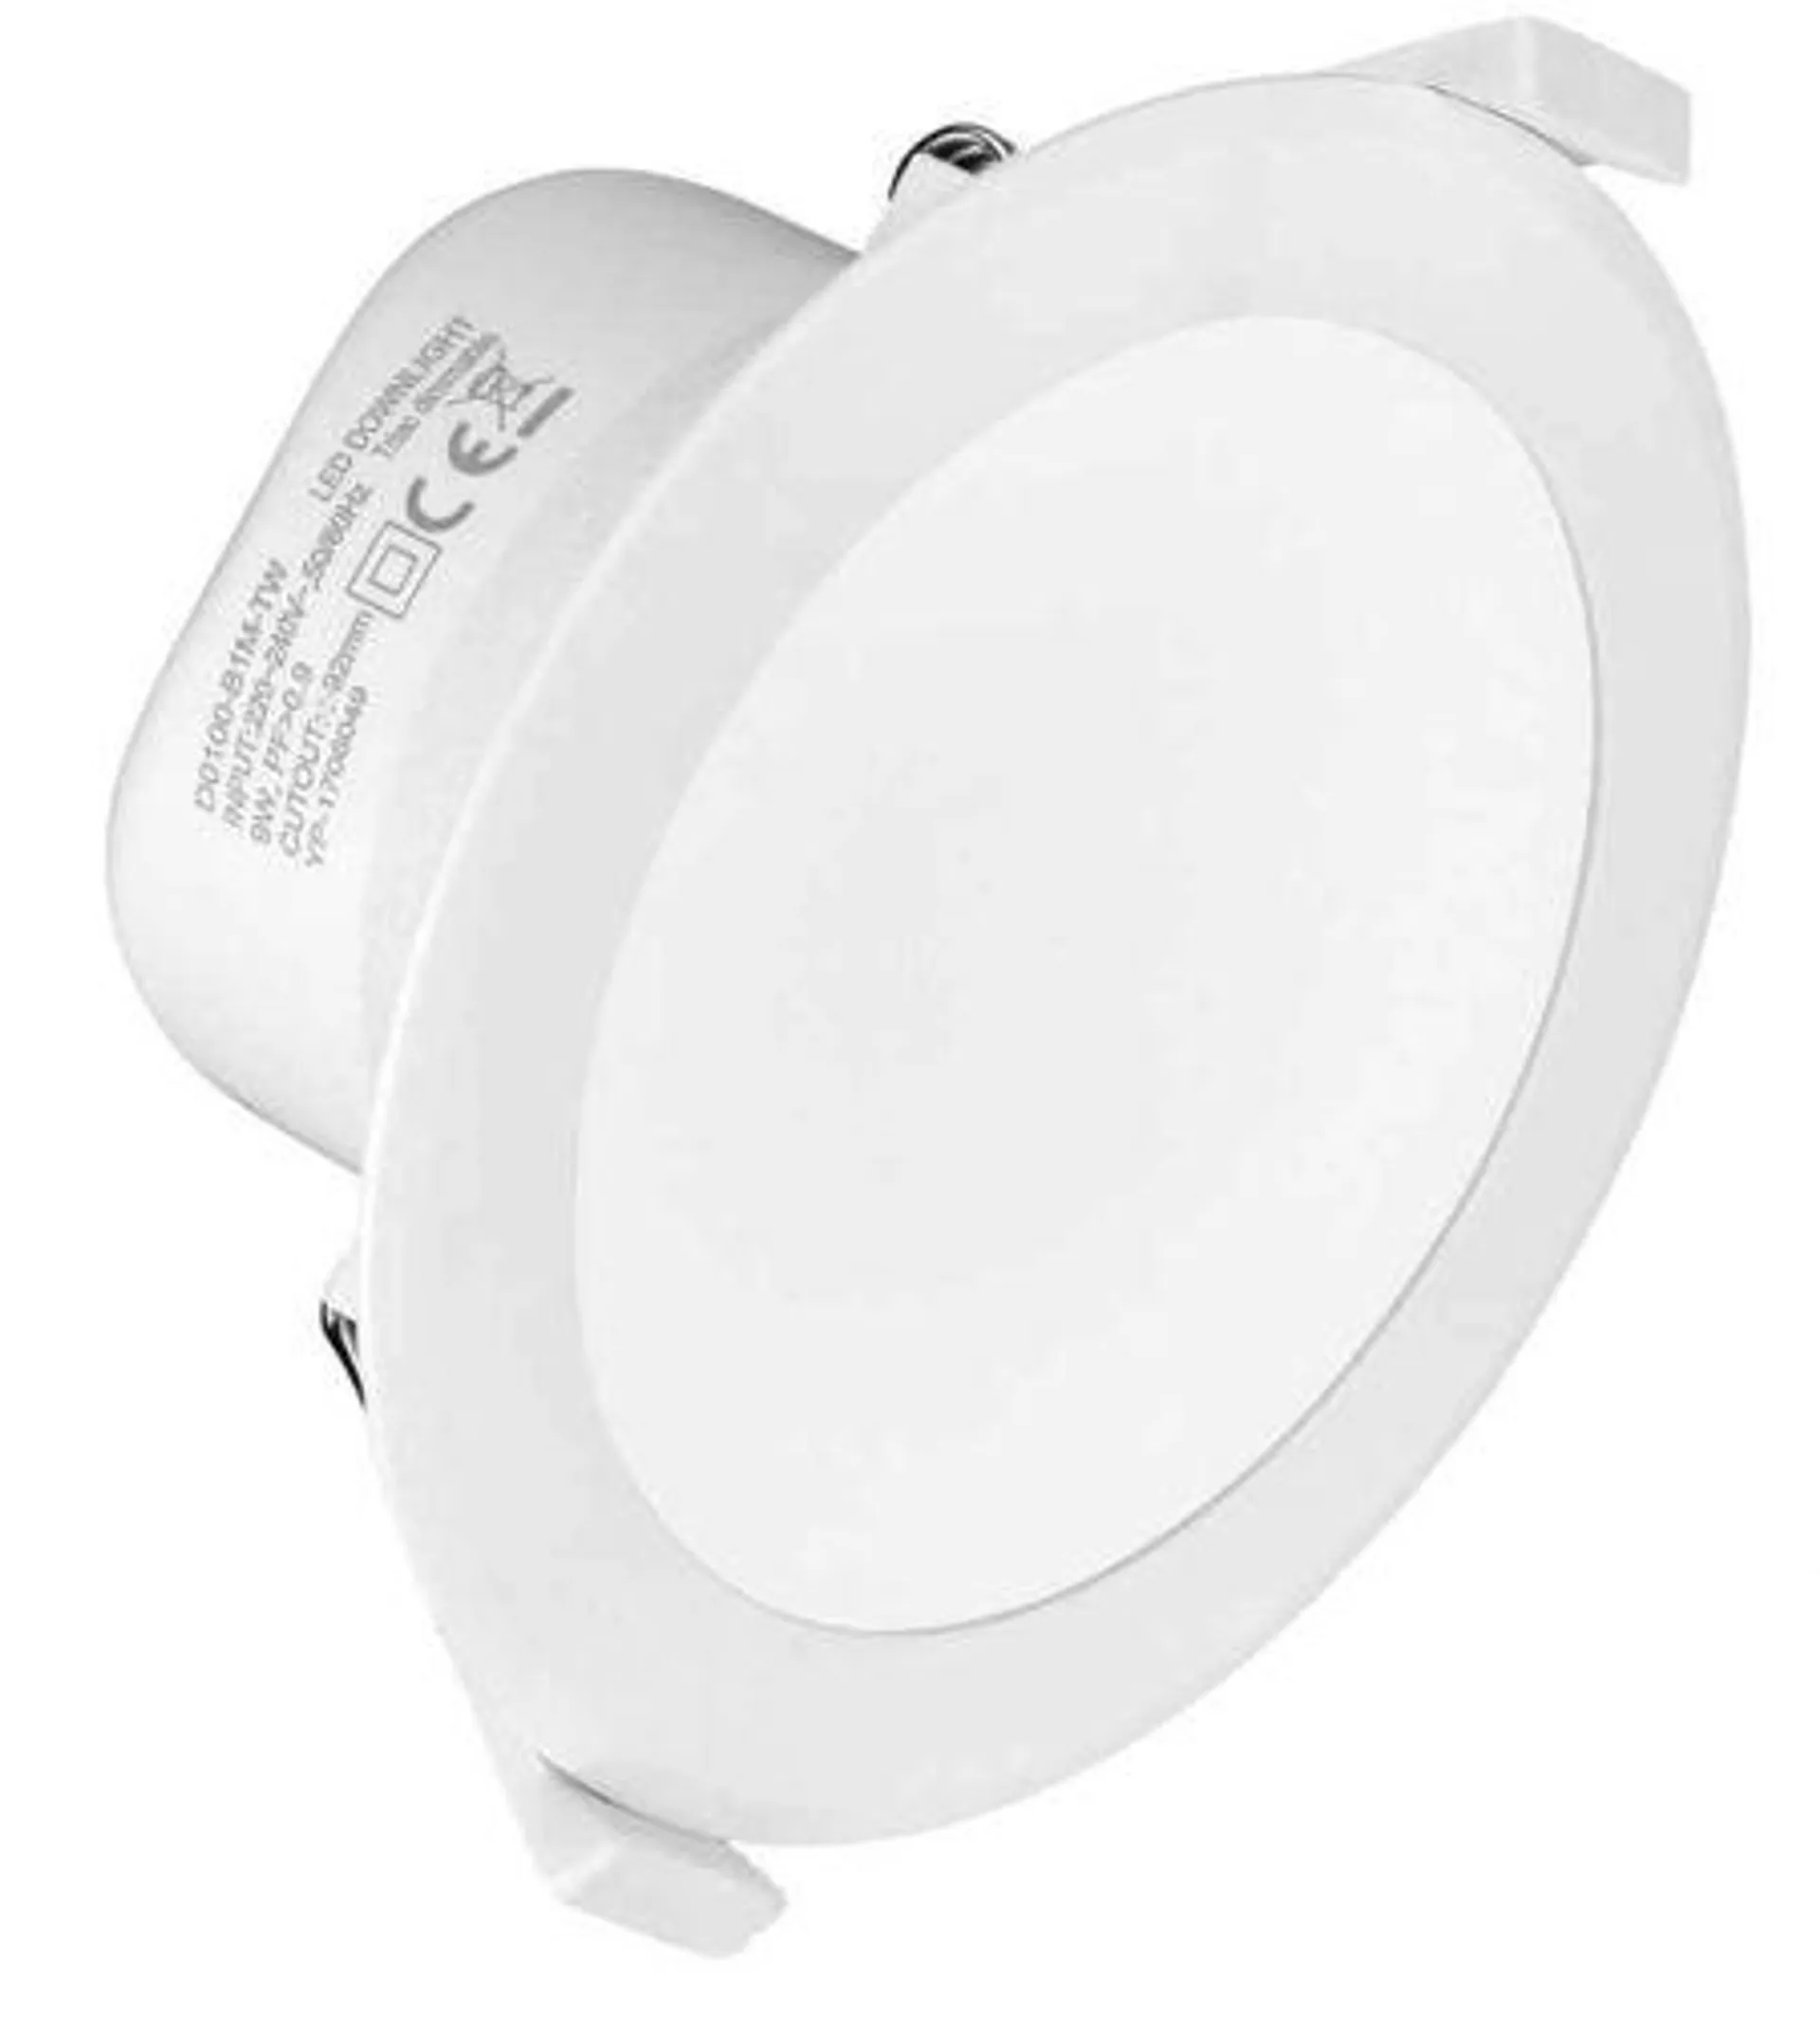 IP44 9W LED Dimmable Downlight White